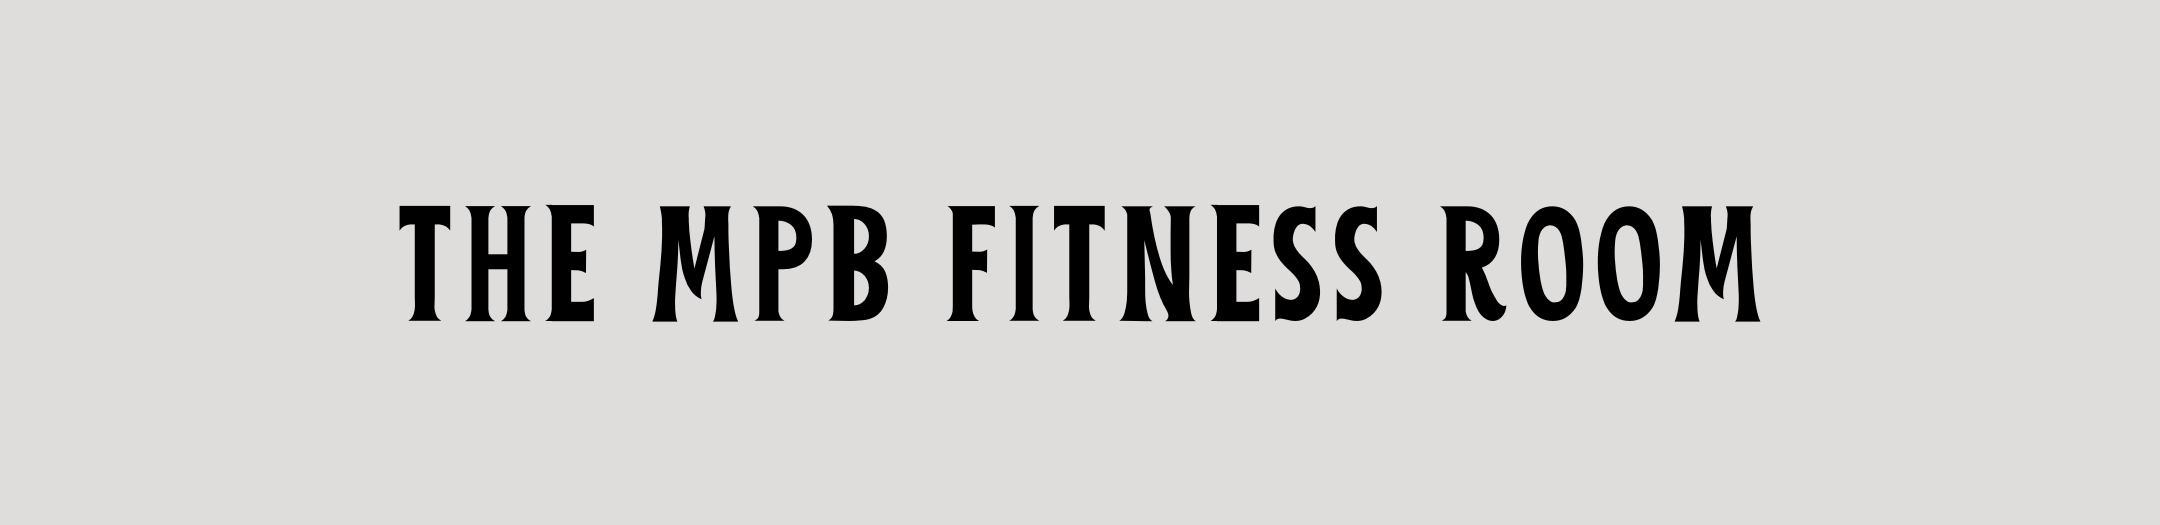 grey background header for mpb fitness room